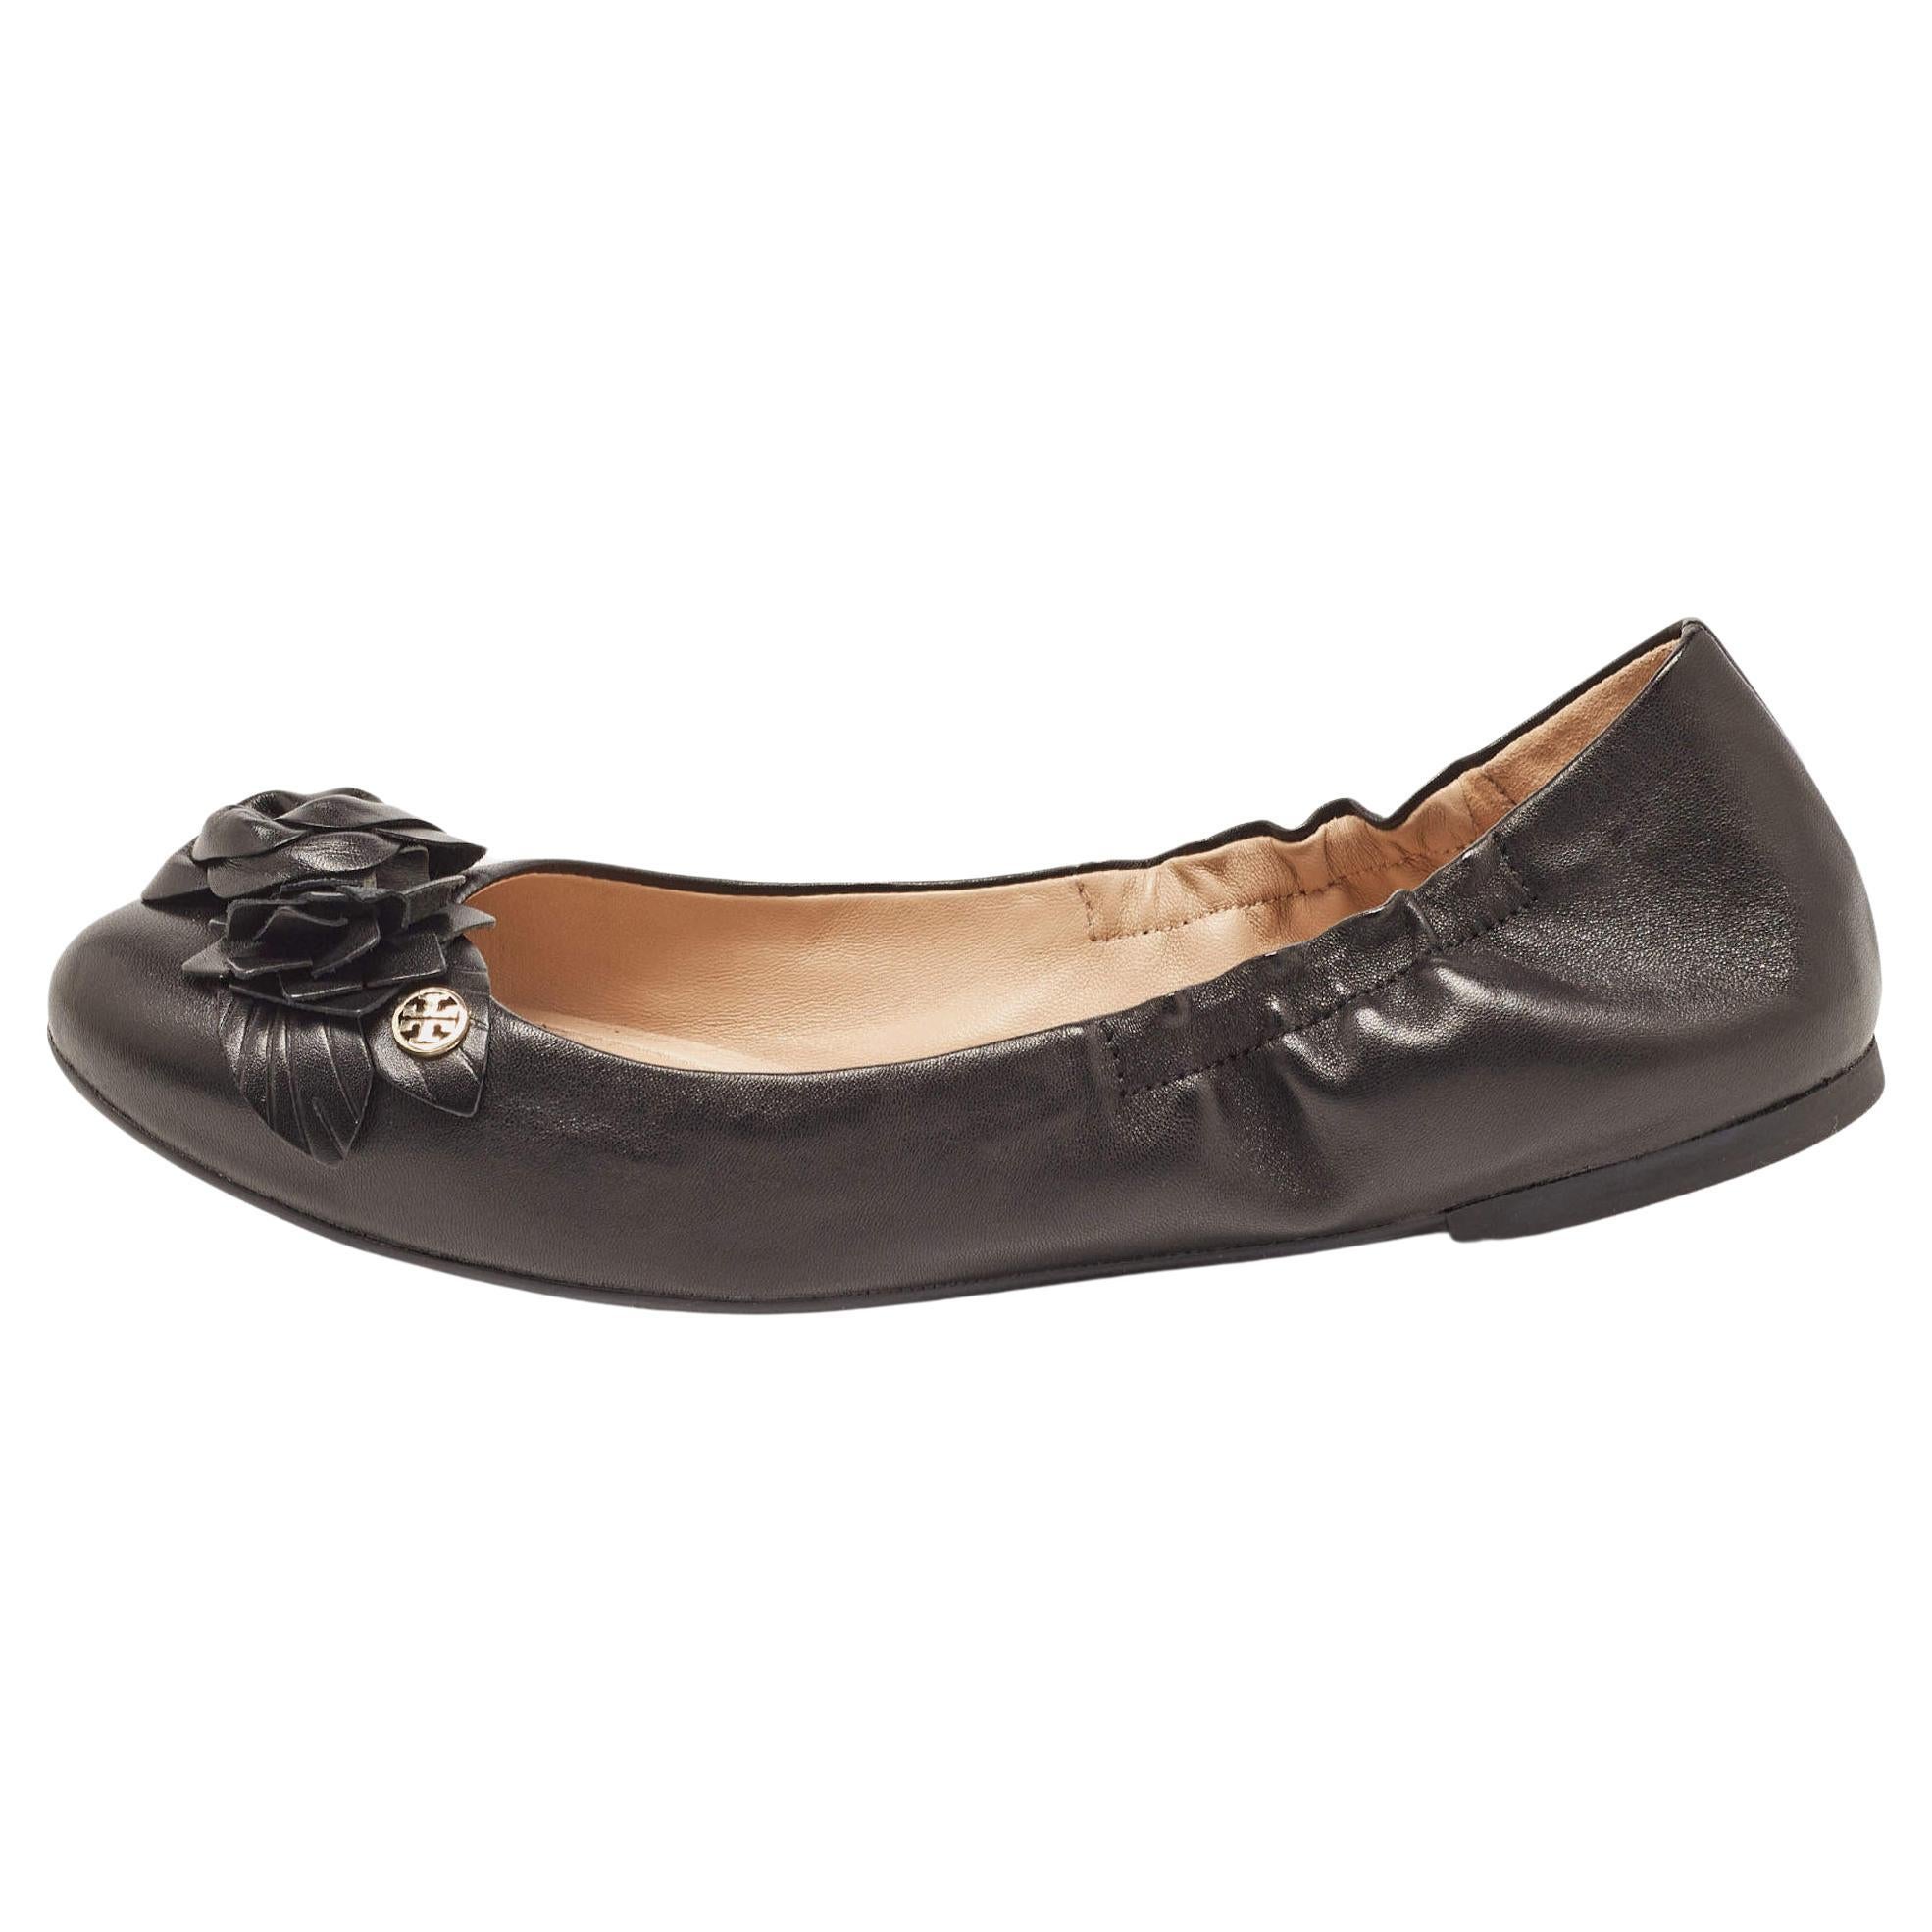 Tory Burch Black Leather Blossom Ballet Flats Size 39.5 For Sale